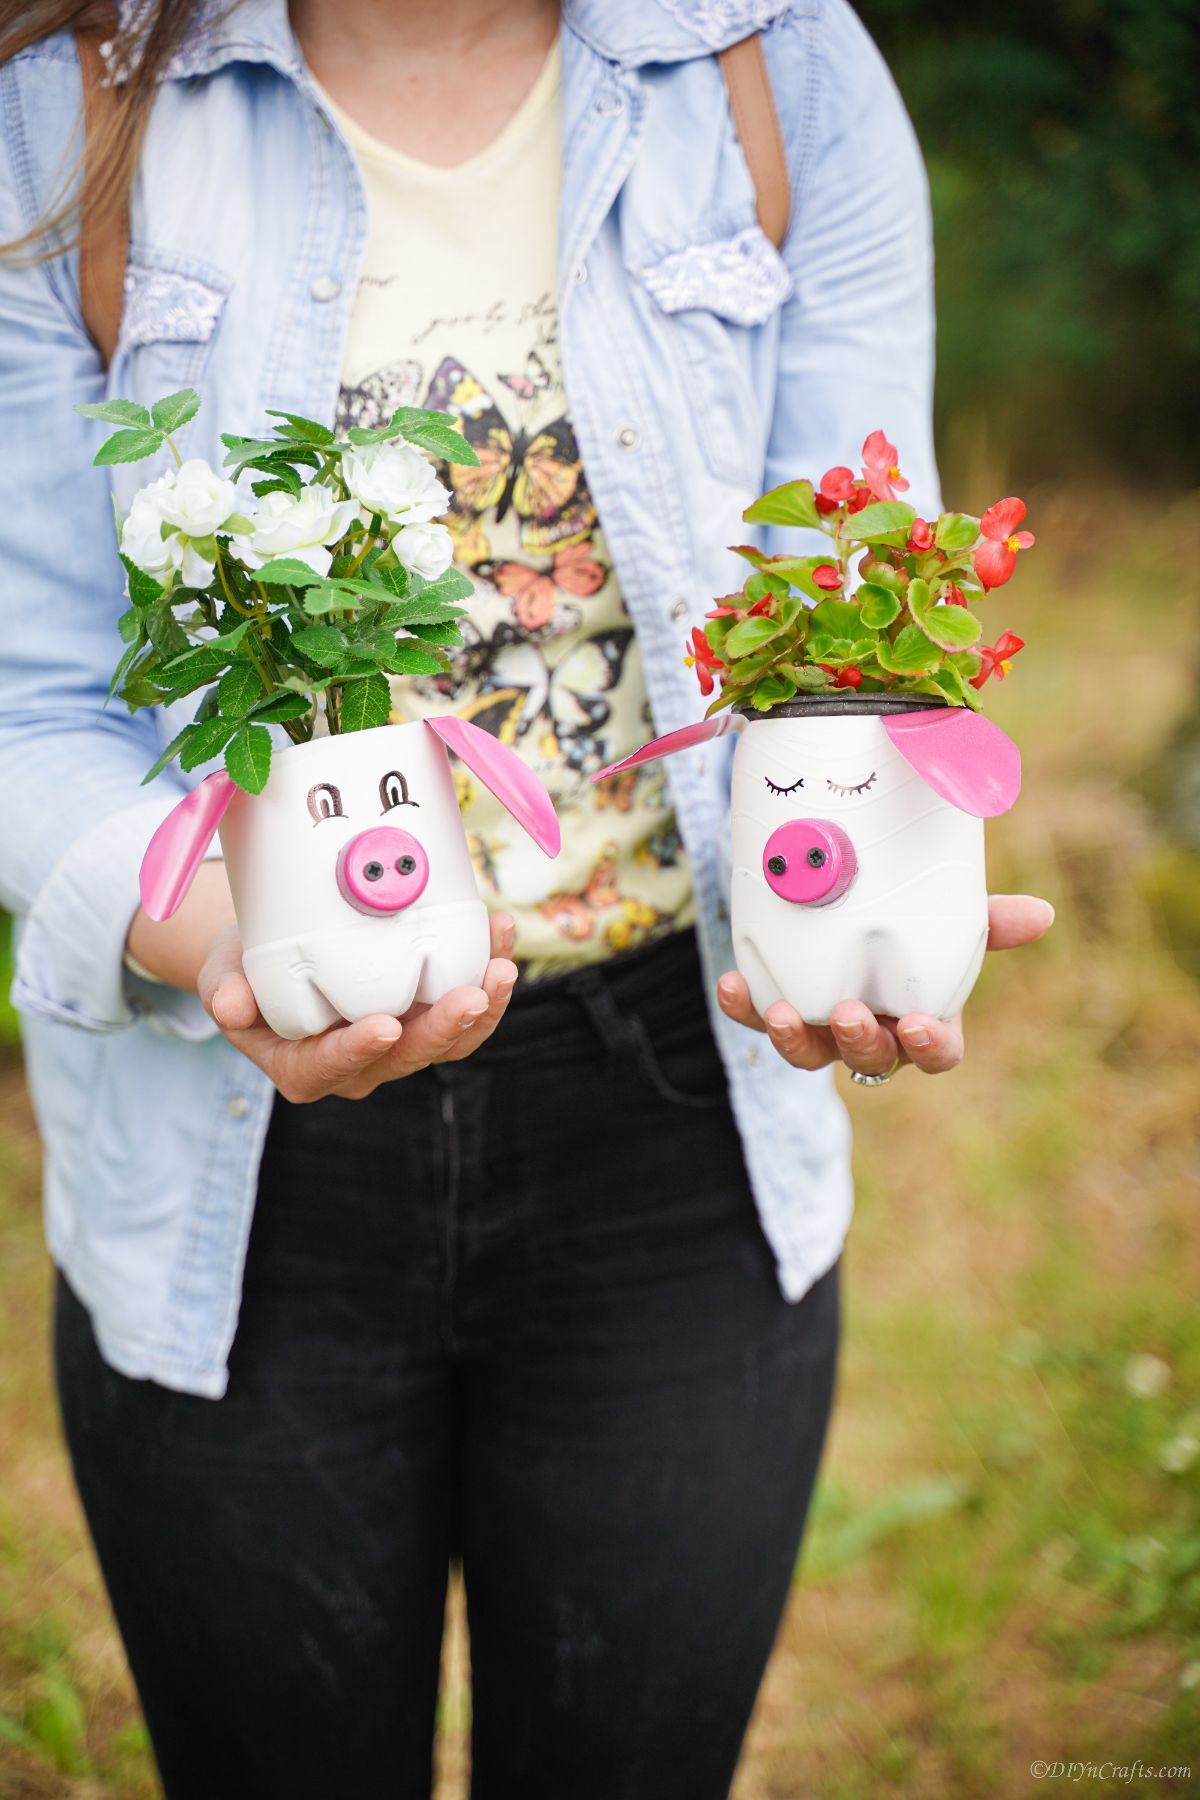 woman in blue shirt holding two pig planters